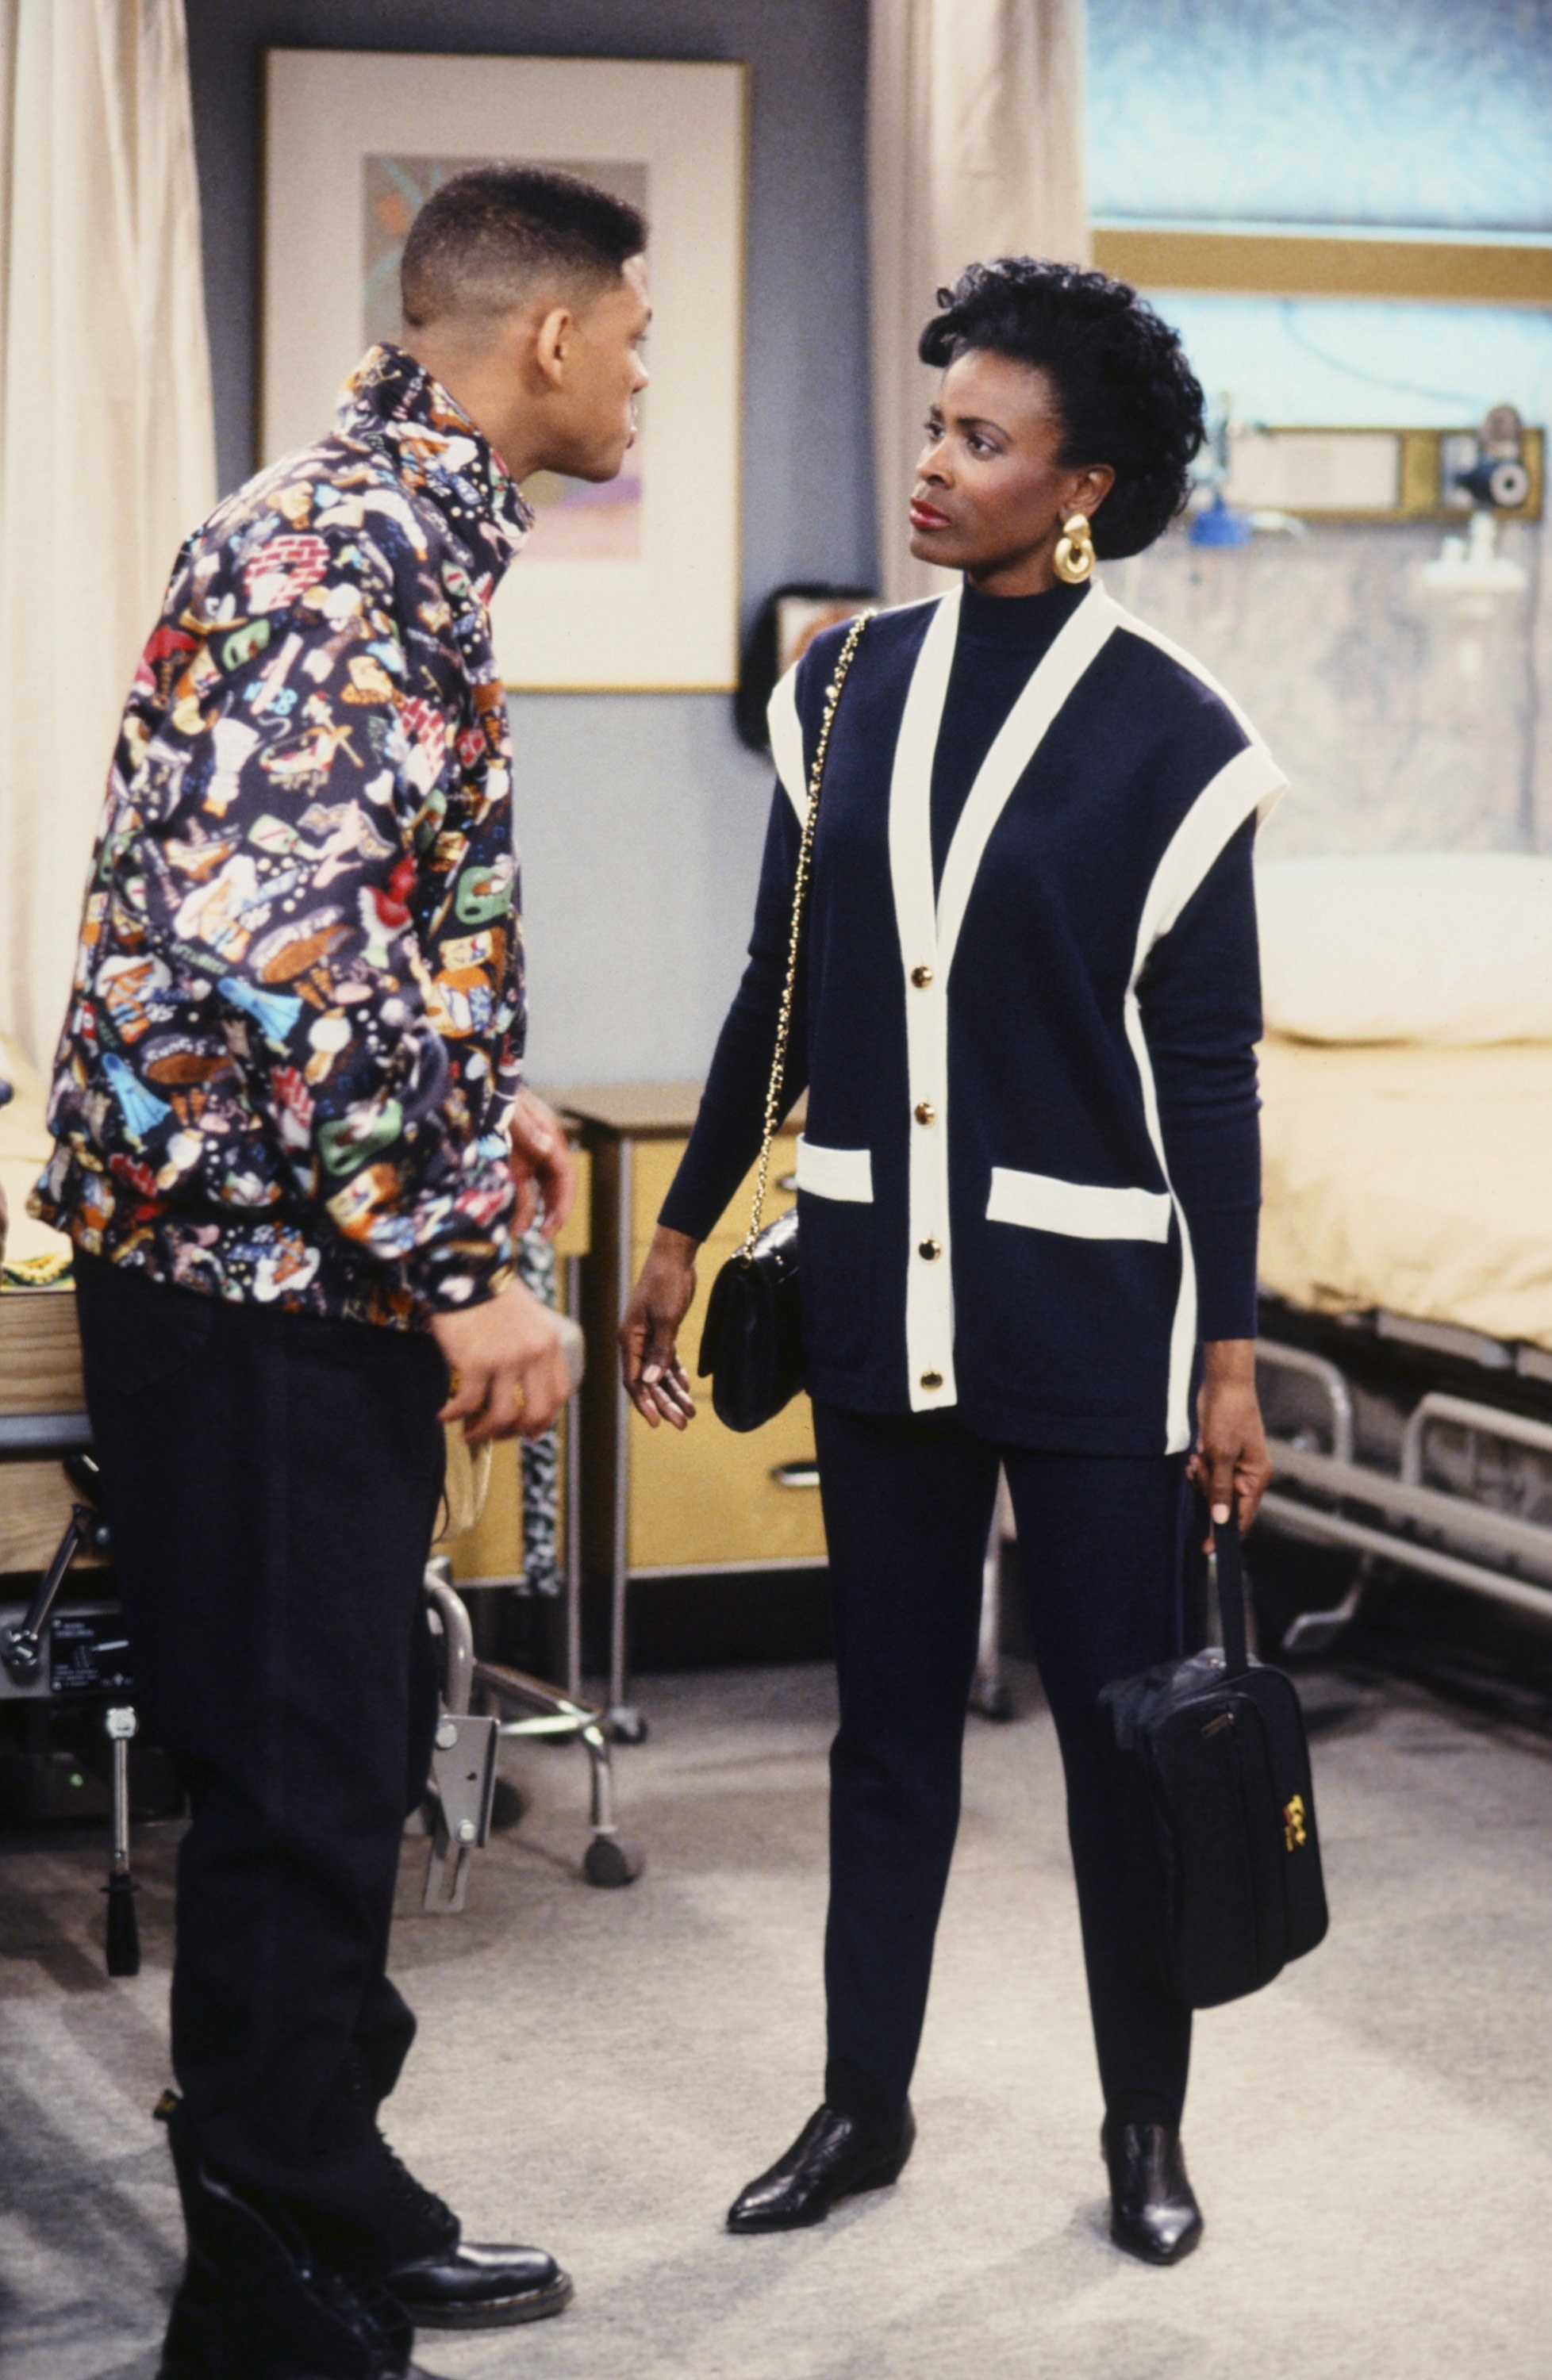 Will Smith and Janet Hubert arguing in scene for &quot;The Fresh Prince of Bel-Air&quot;